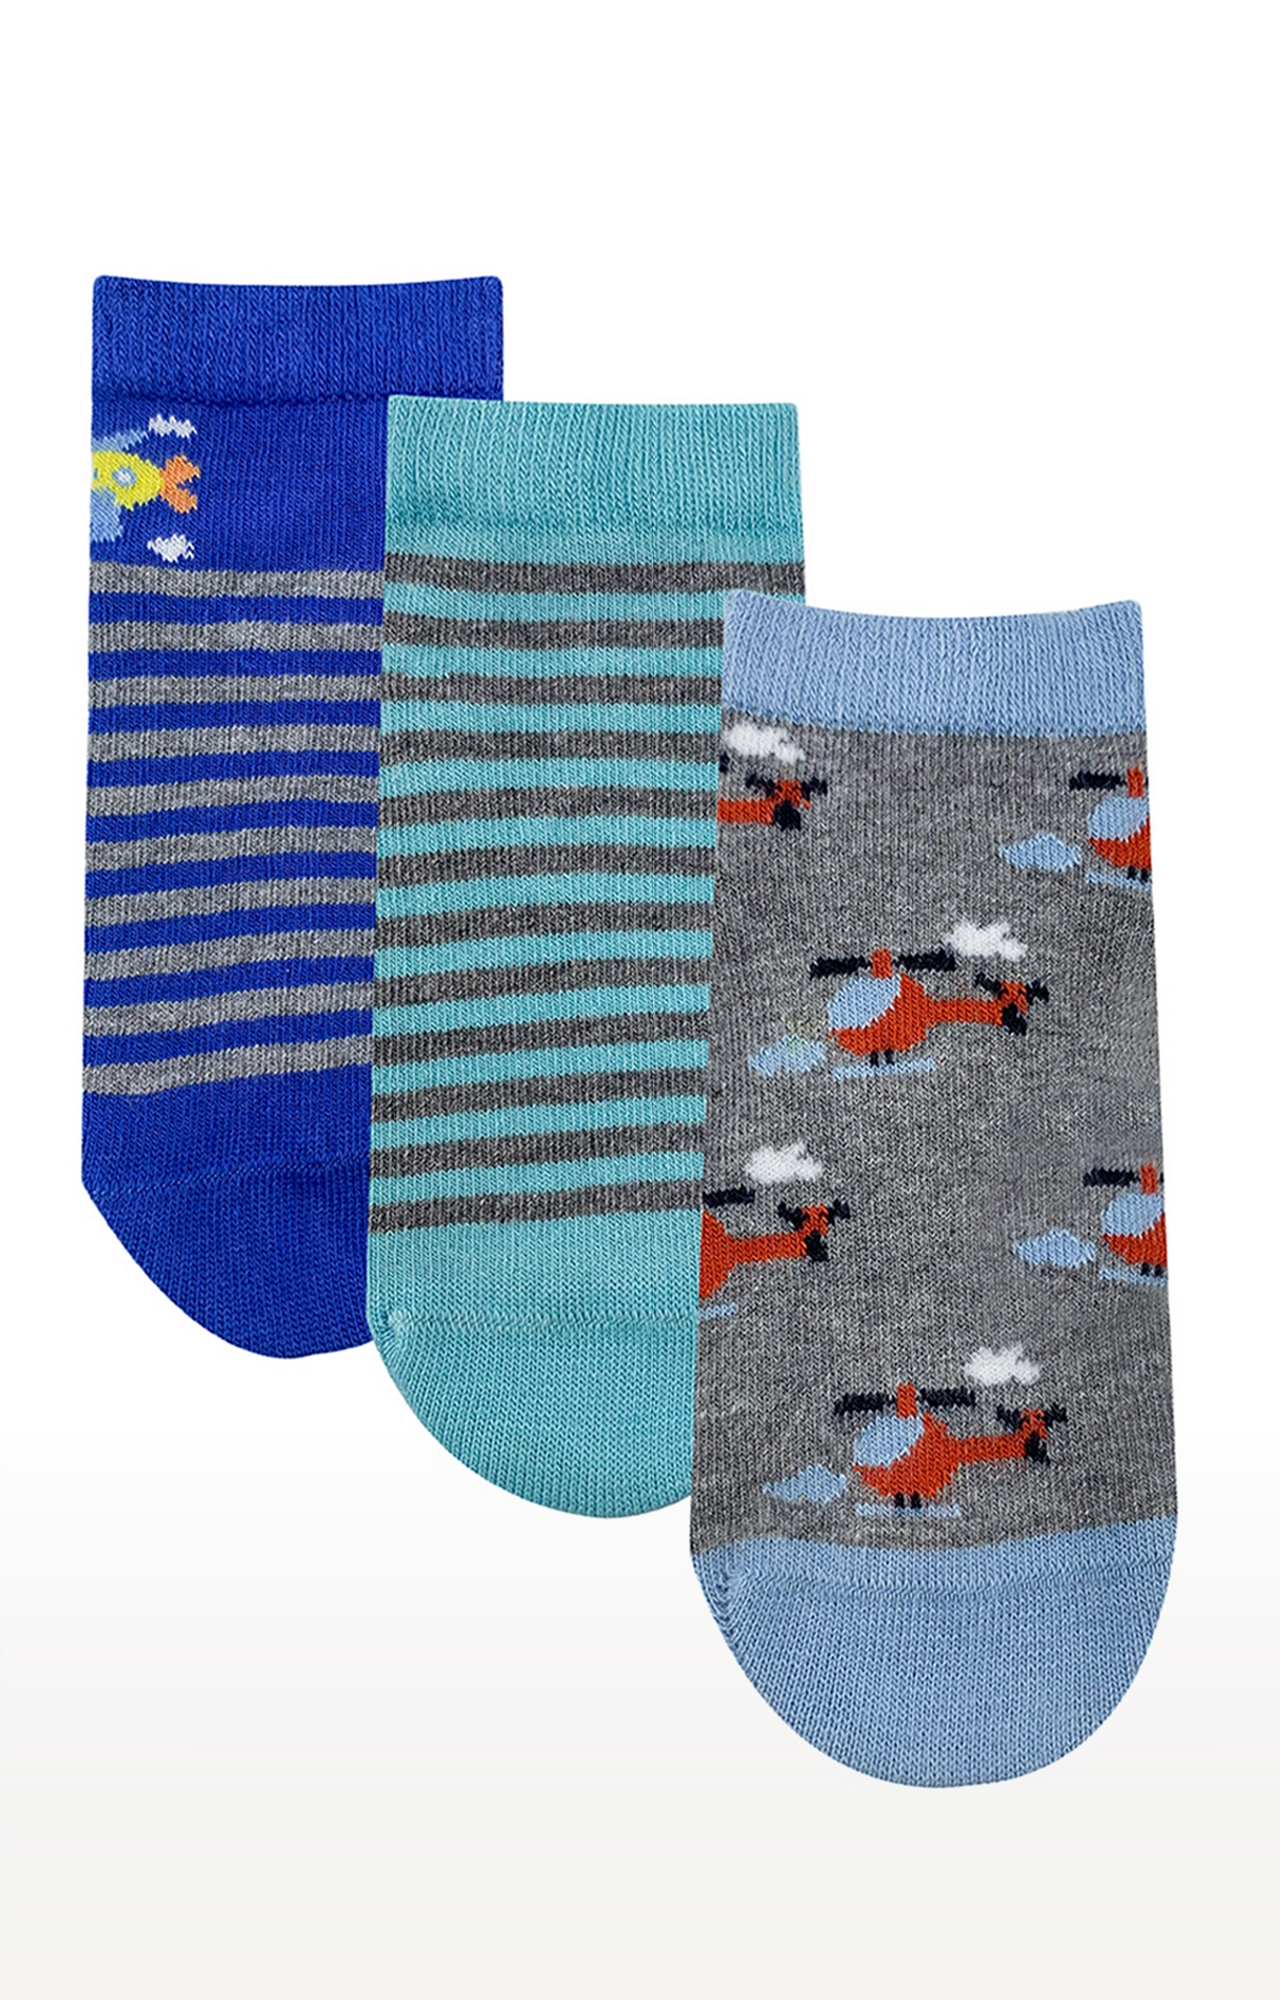 Mint & Oak Up In The Sky Cotton Multi Ankle Length Socks for Kids - Pack of 3